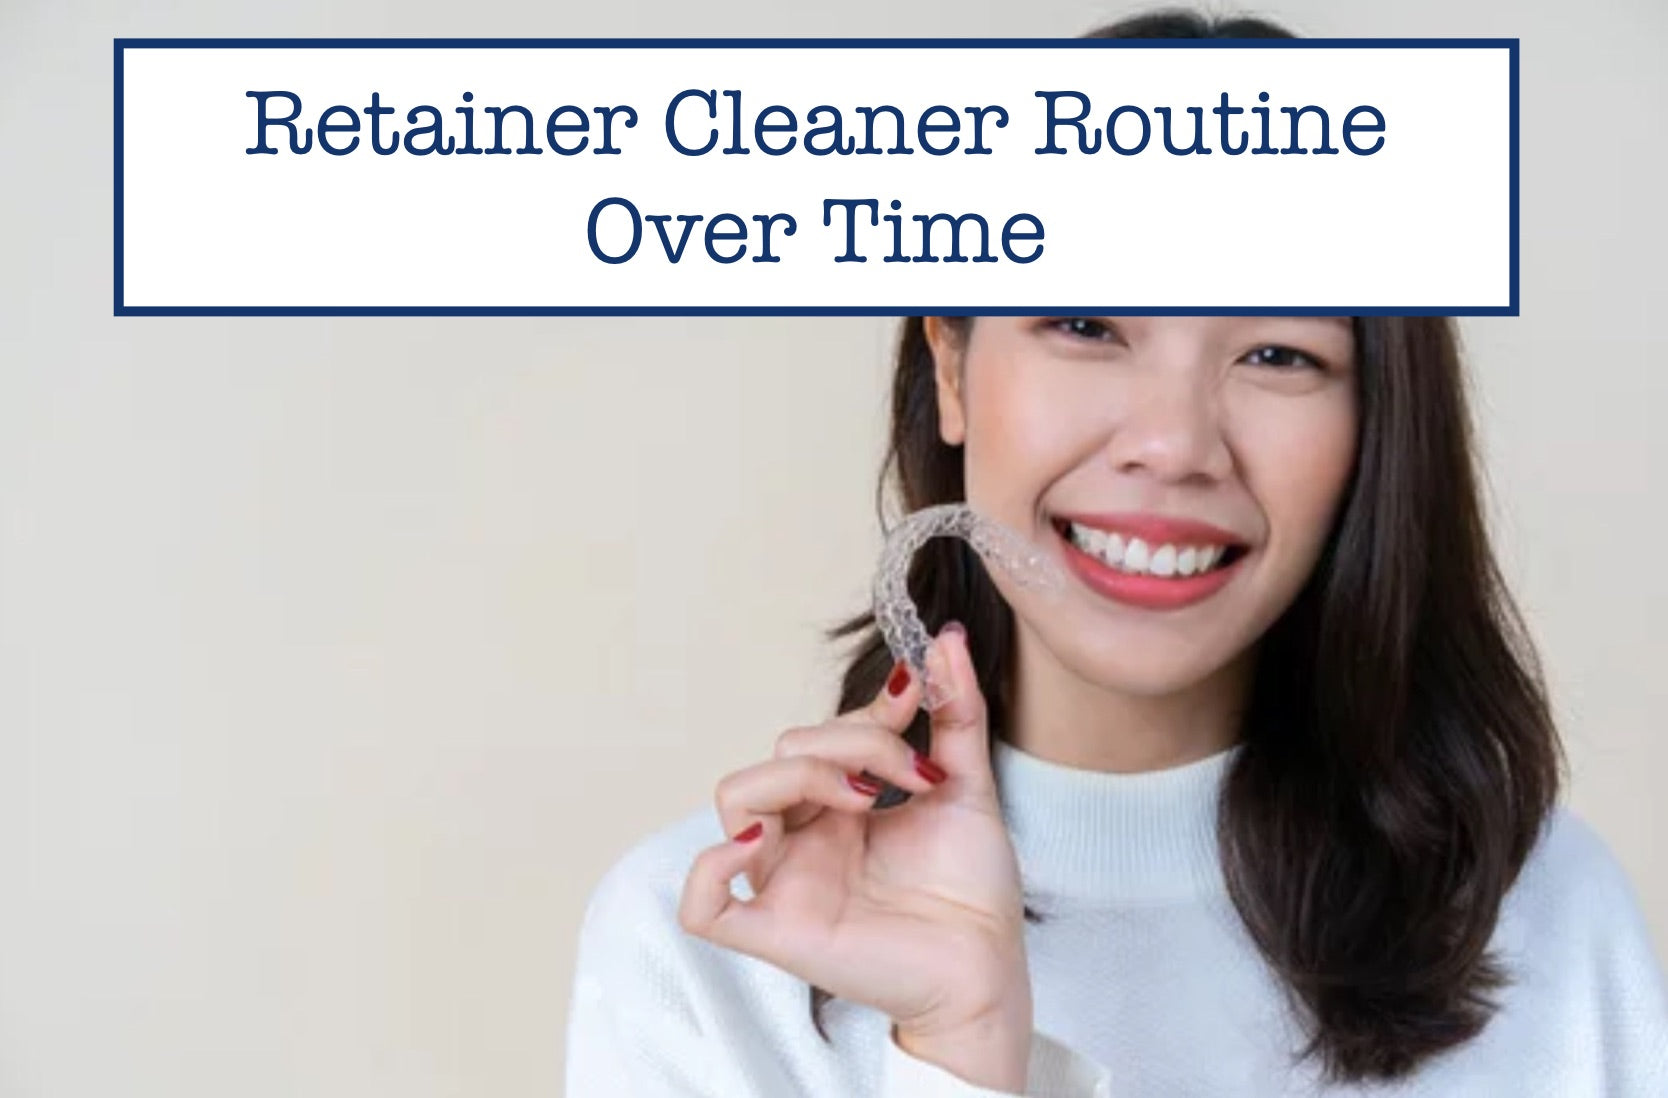 Retainer Cleaner Routine Over Time